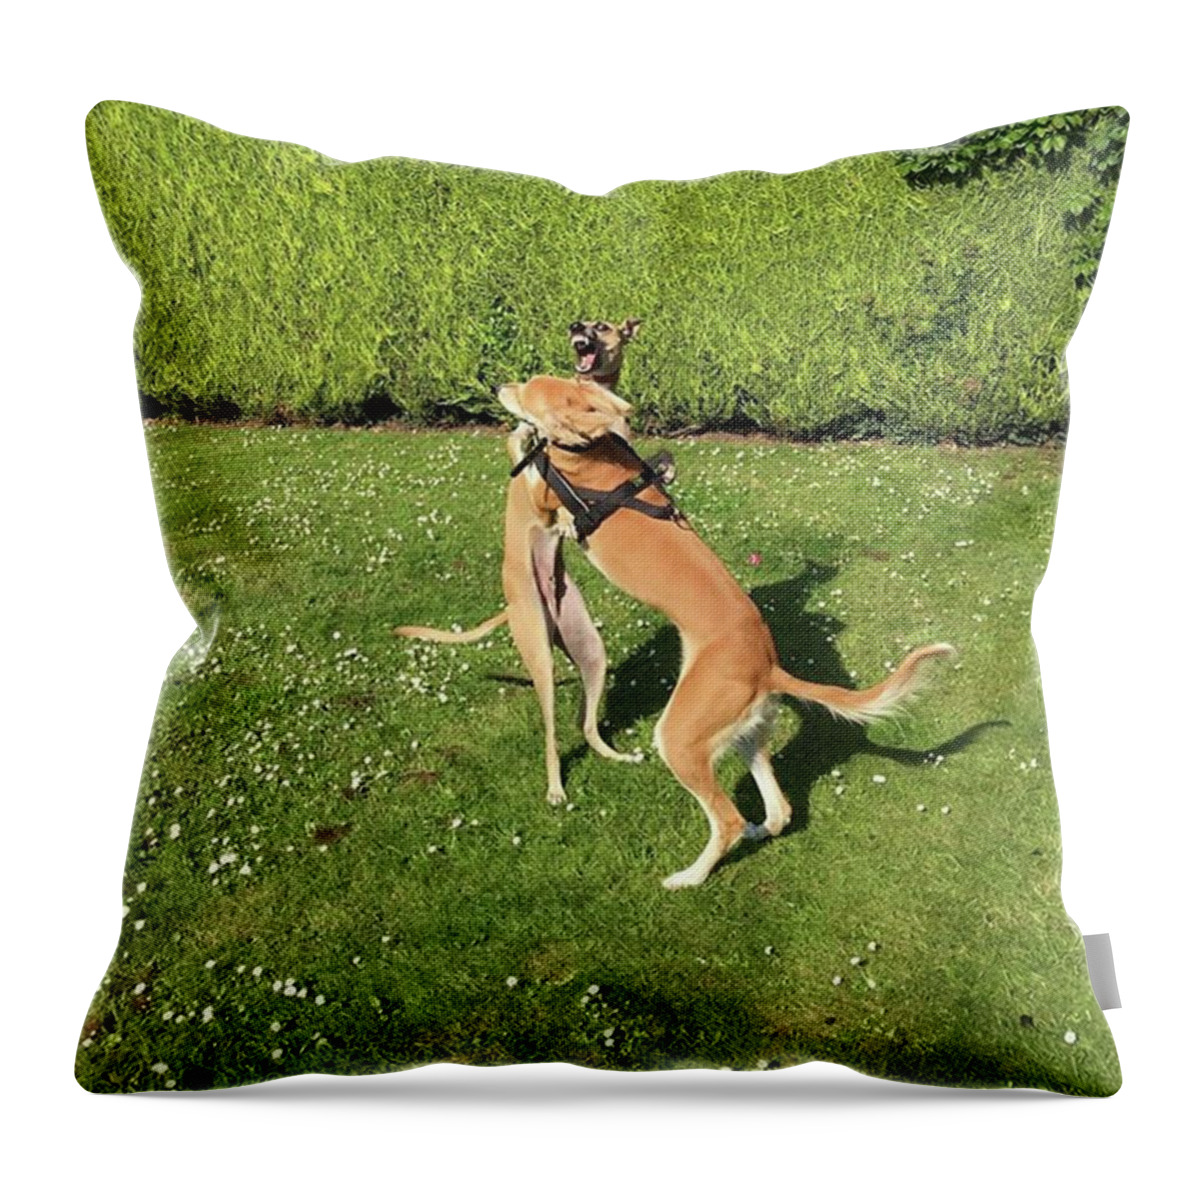 Persiangreyhound Throw Pillow featuring the photograph Ava The Saluki And Finly The Lurcher by John Edwards